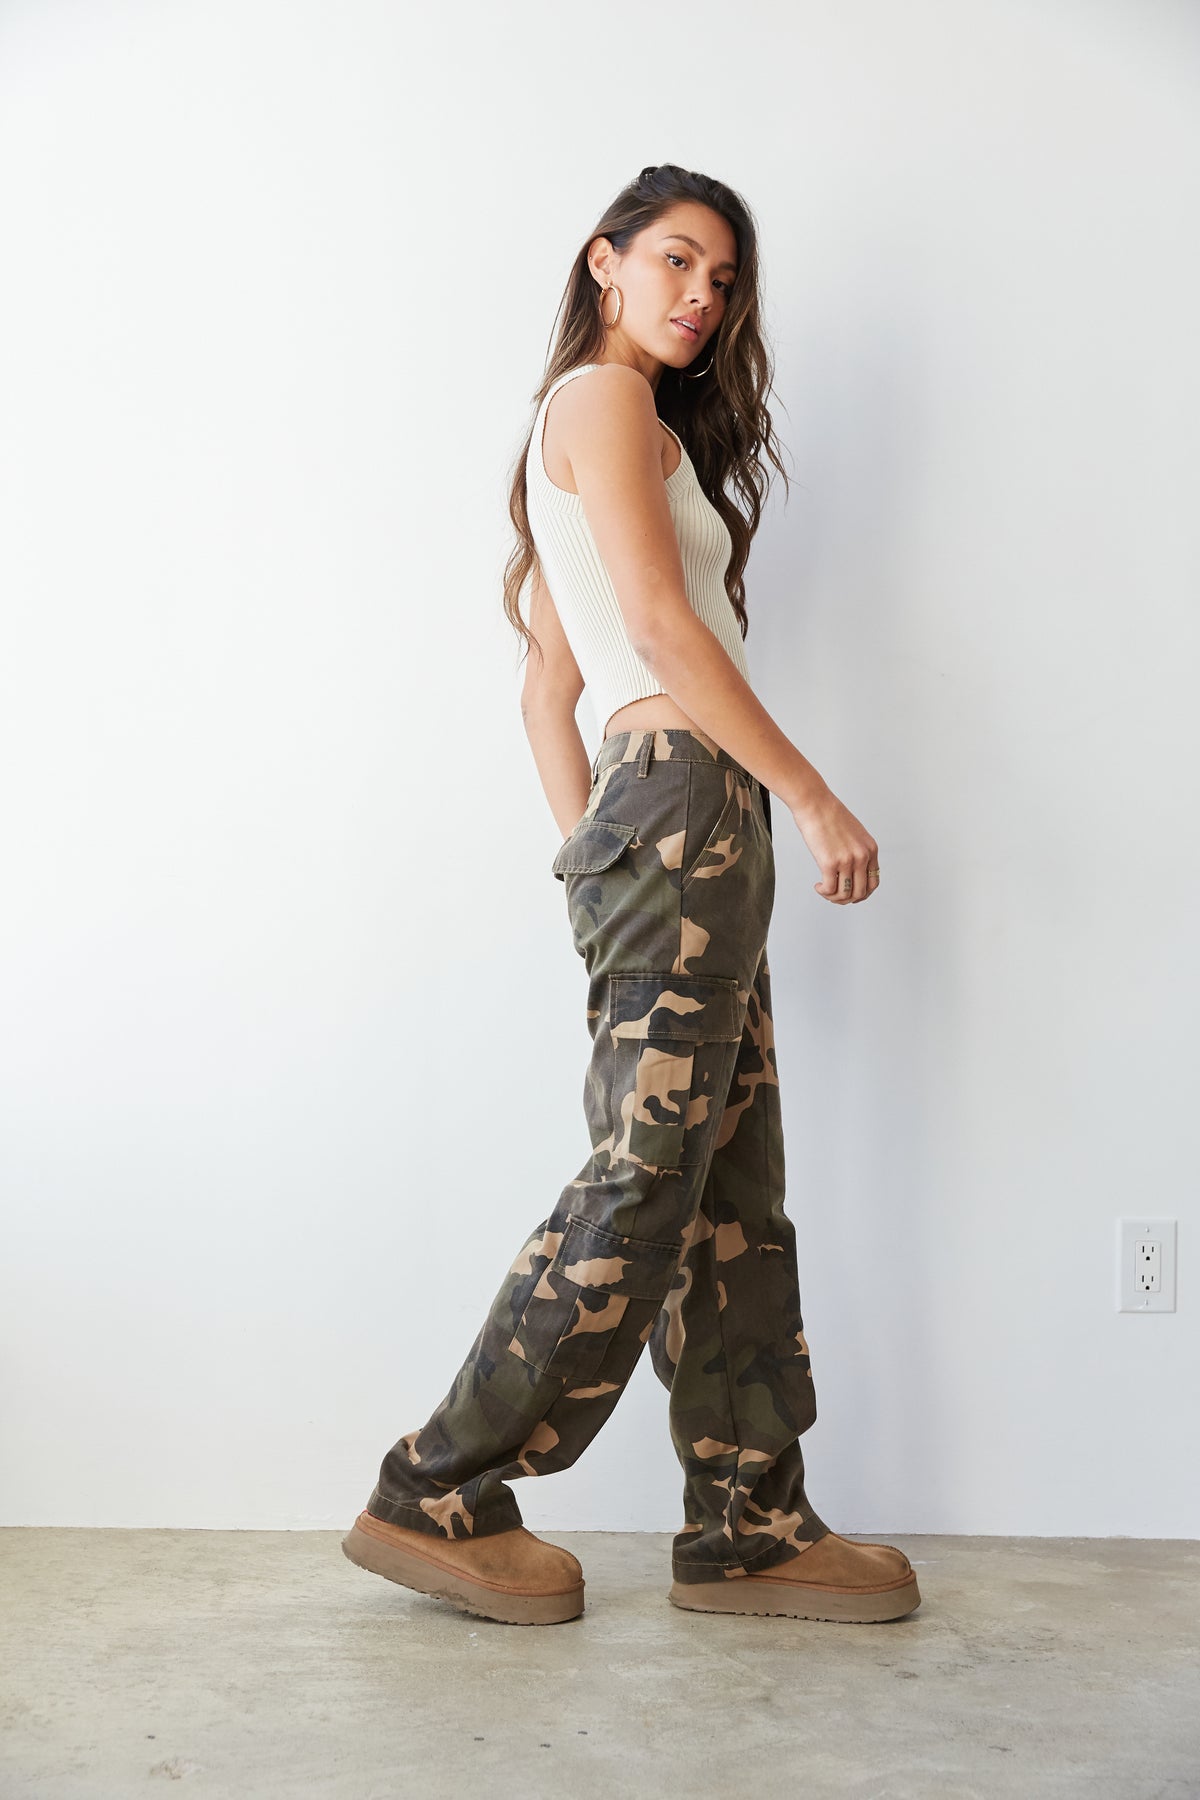 trendy green camouflage pants - cargo pants - street outfit